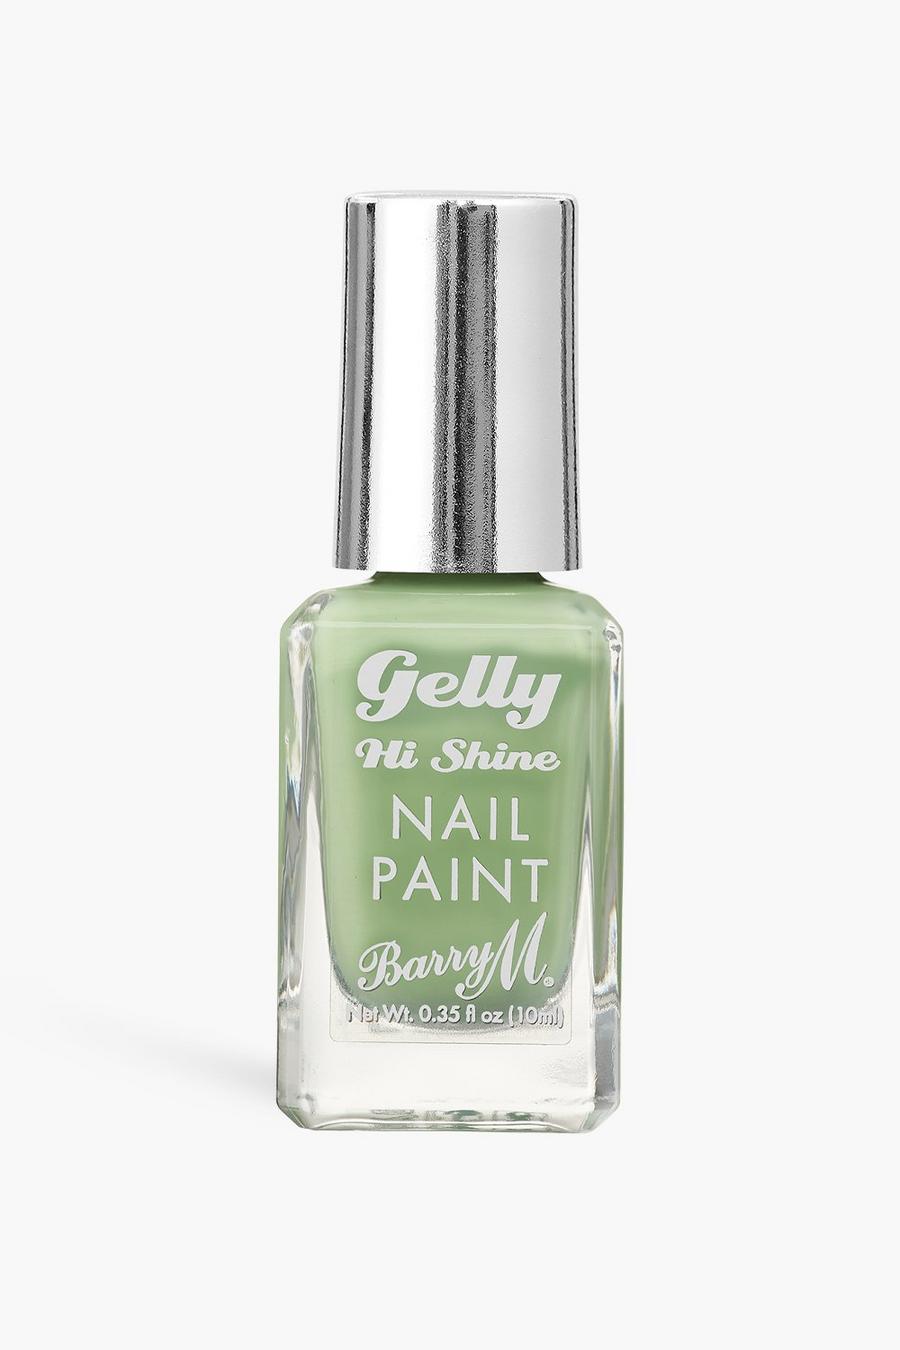 Barry M Gelly Nail Varnish - Pistachio